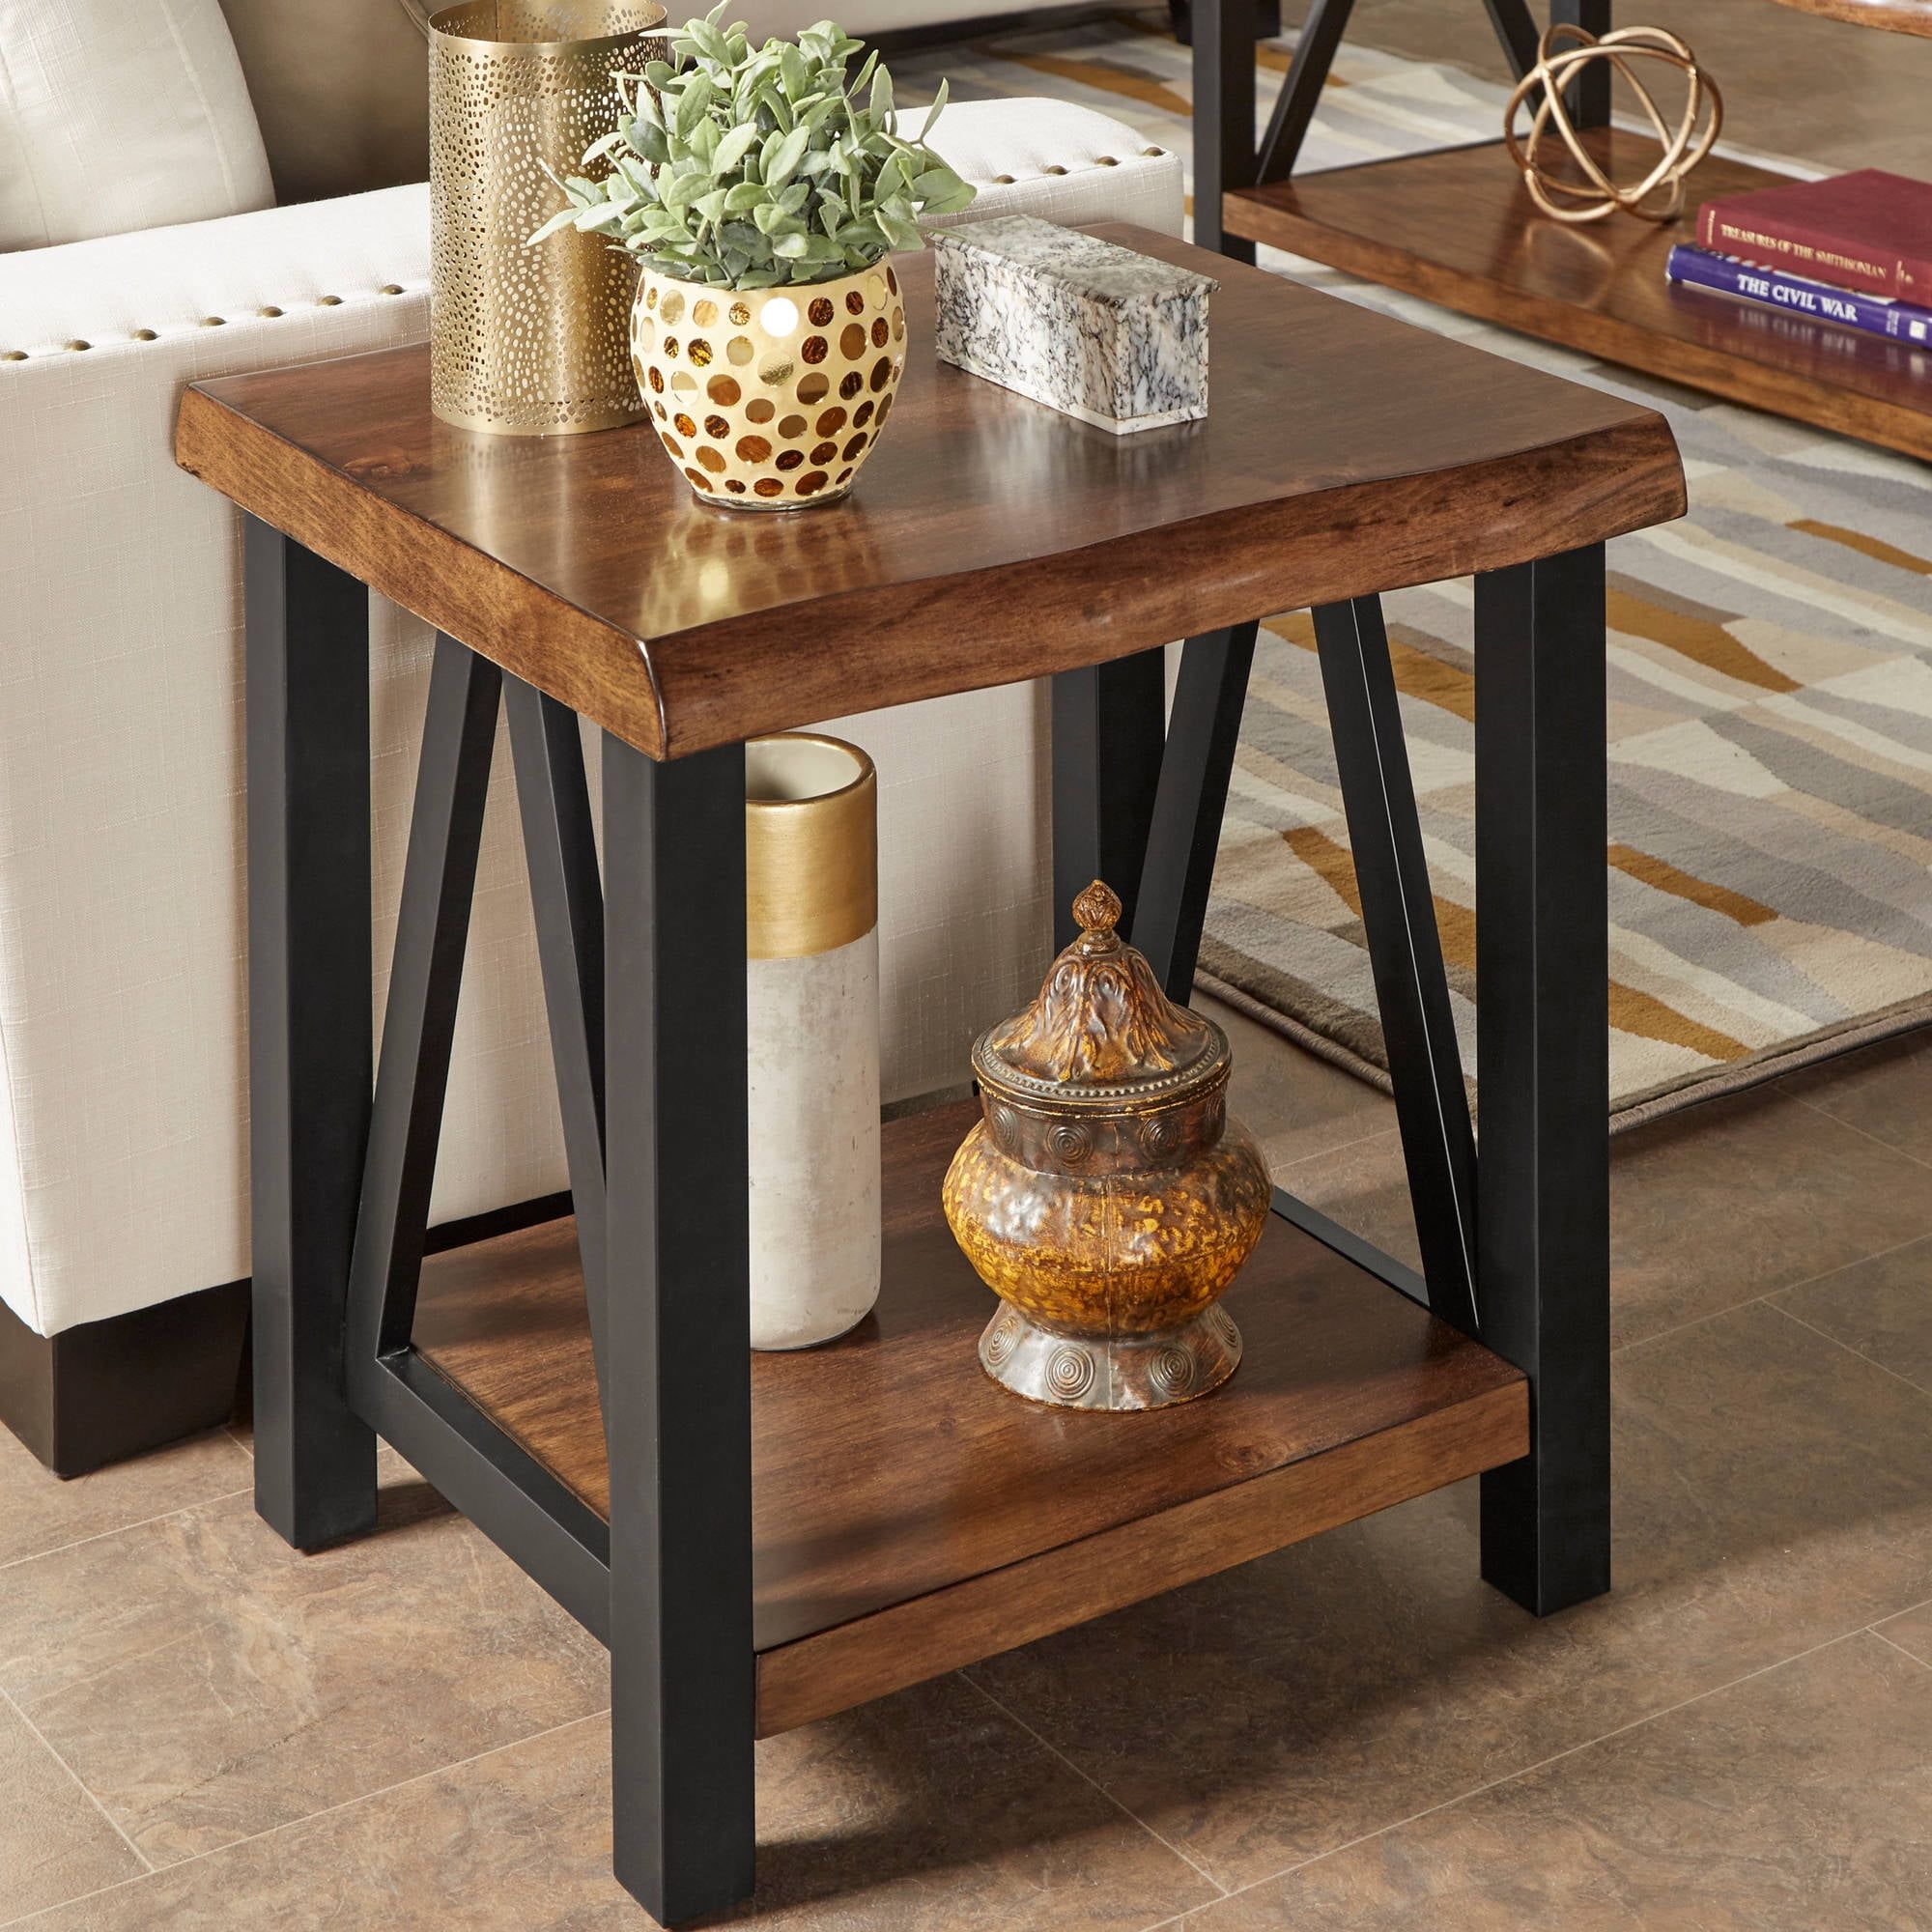 Weston Home Rustic Metal Base End Table With Natural Edge Table Top And Inside Metal Side Tables For Living Spaces (Gallery 2 of 20)